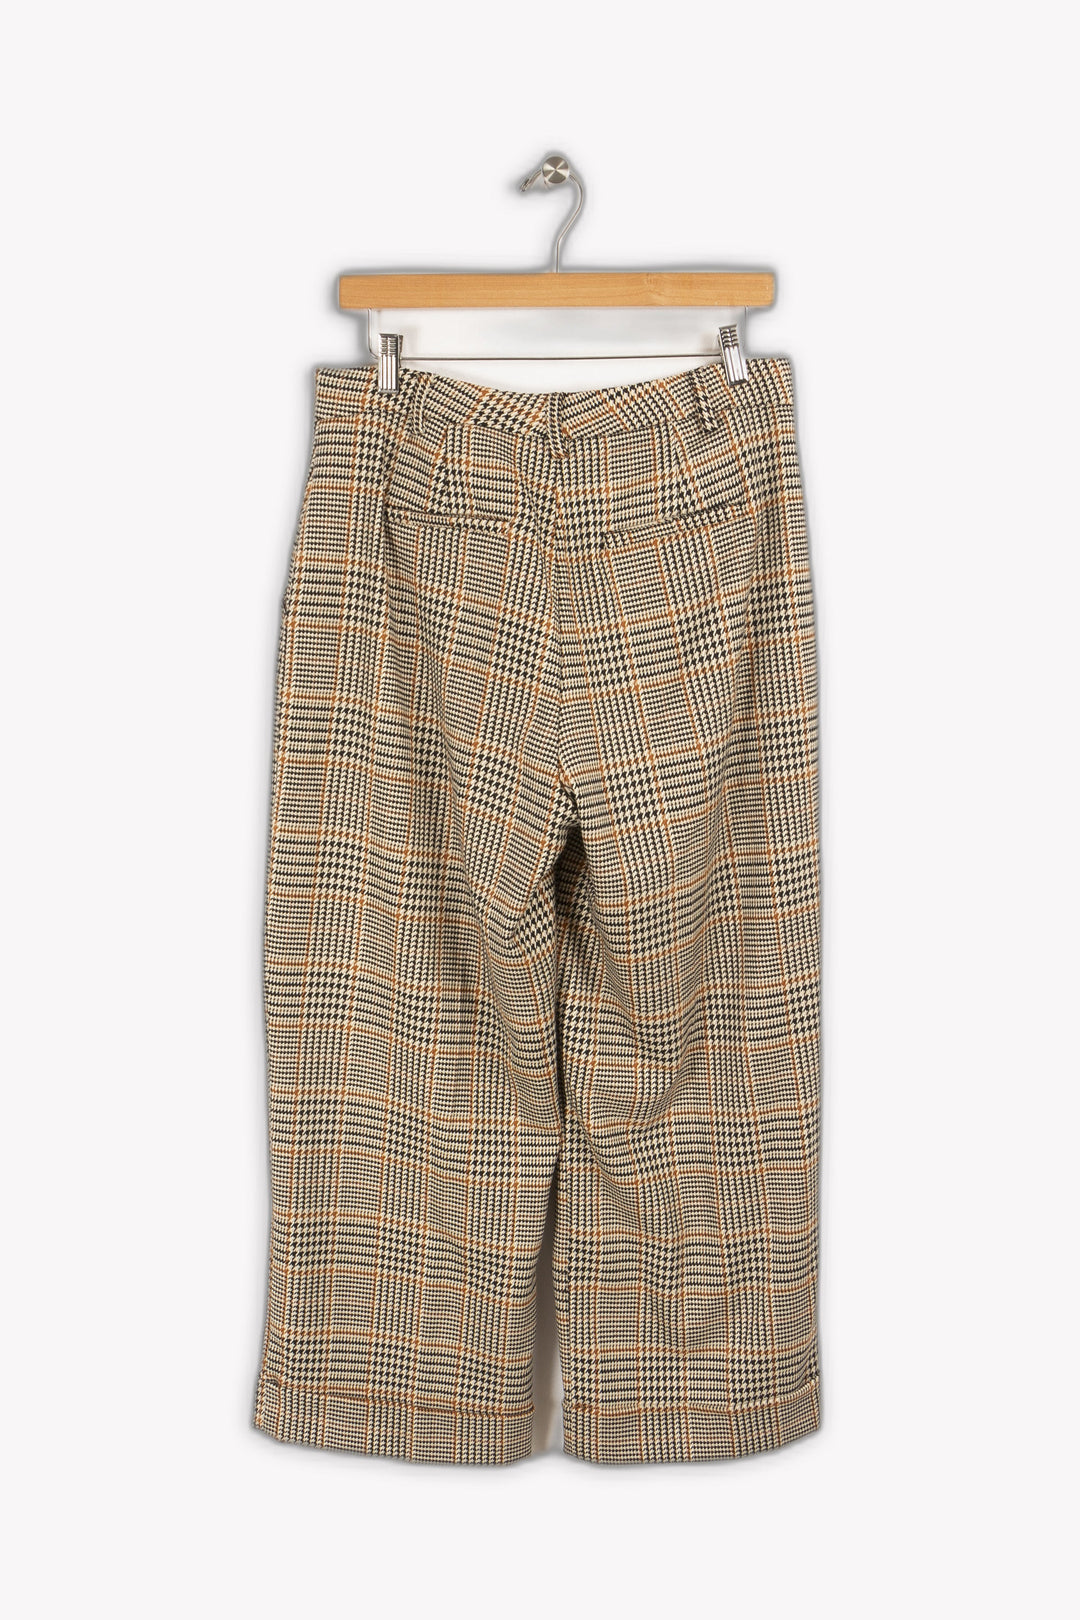 Checked pants - Size L/40